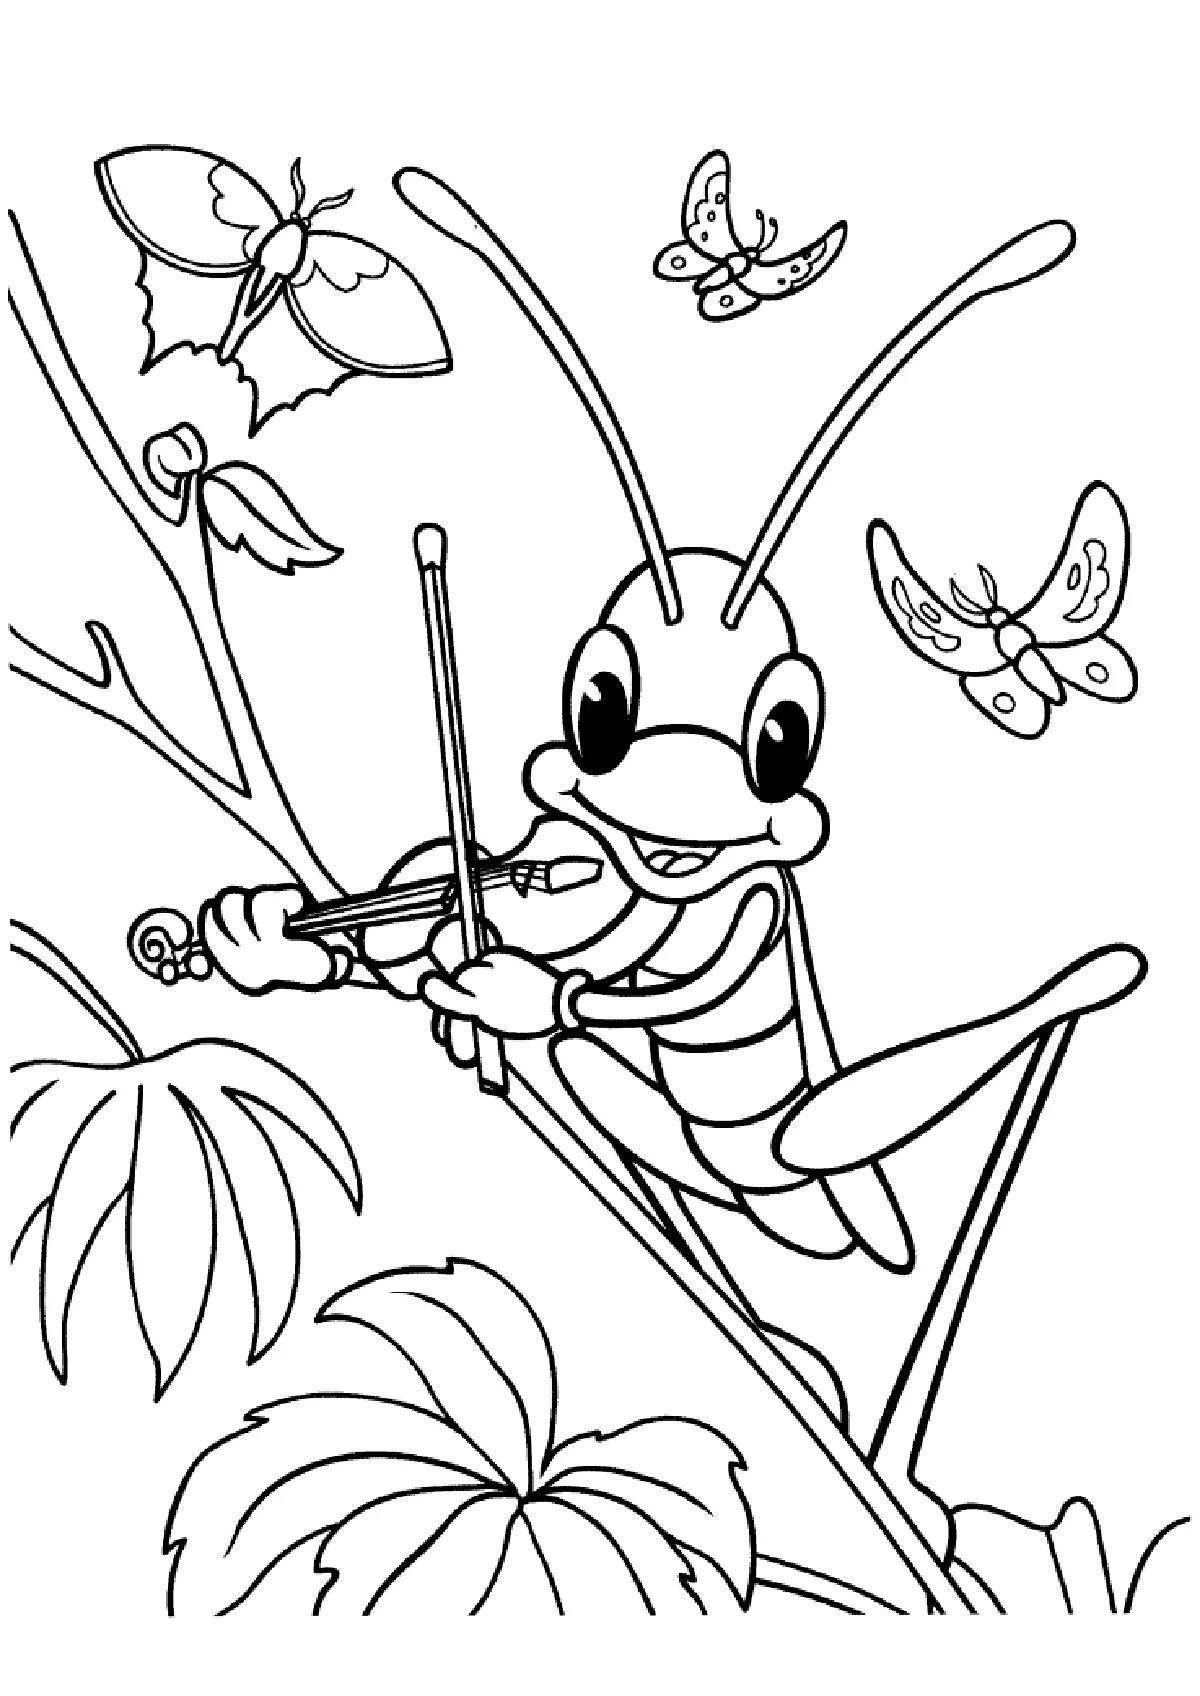 Colorful cricket coloring page